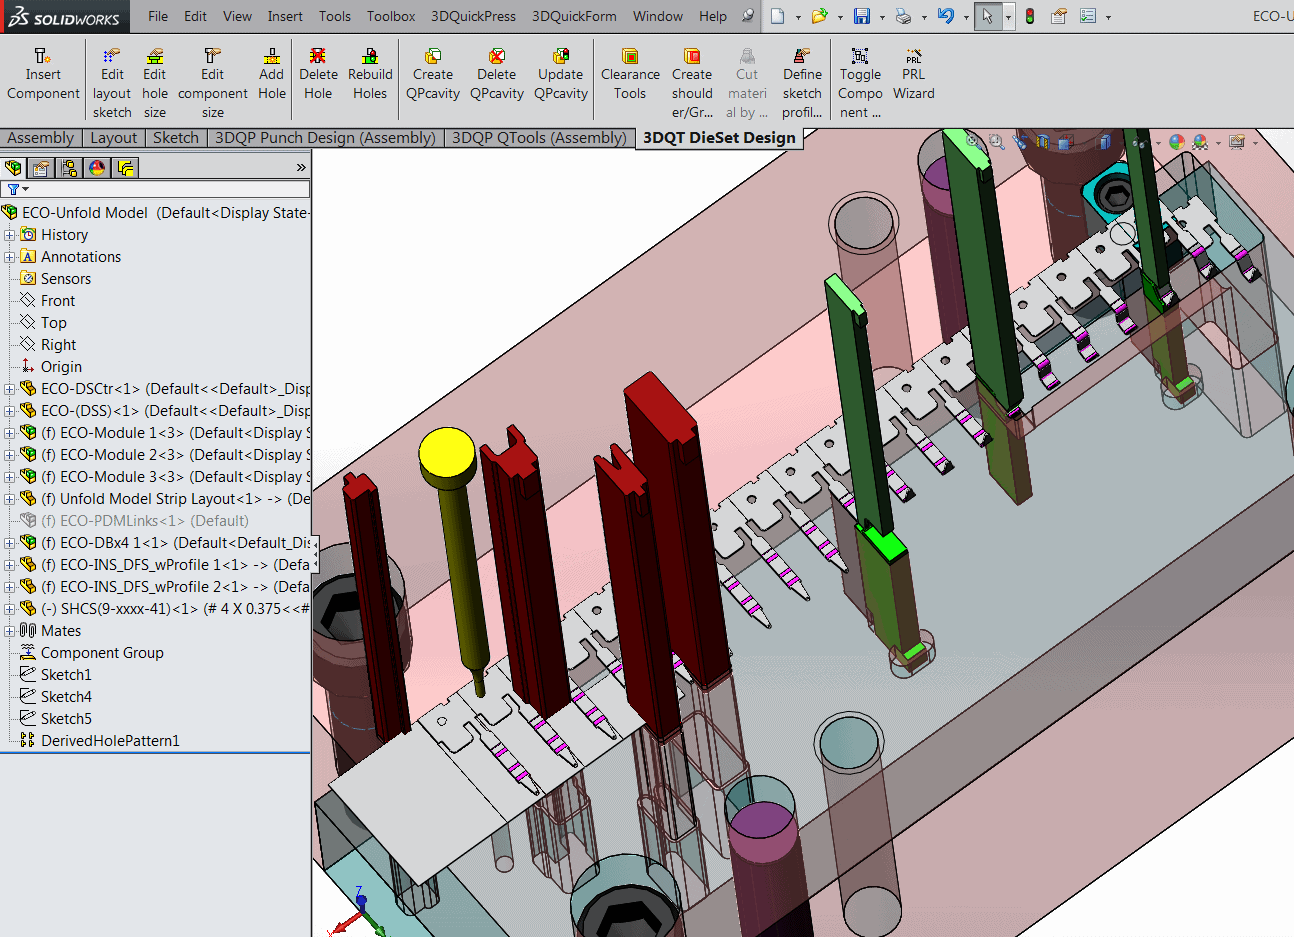 , How to update ECO changes to 3DQPress Punch Design inside SOLIDWORKS